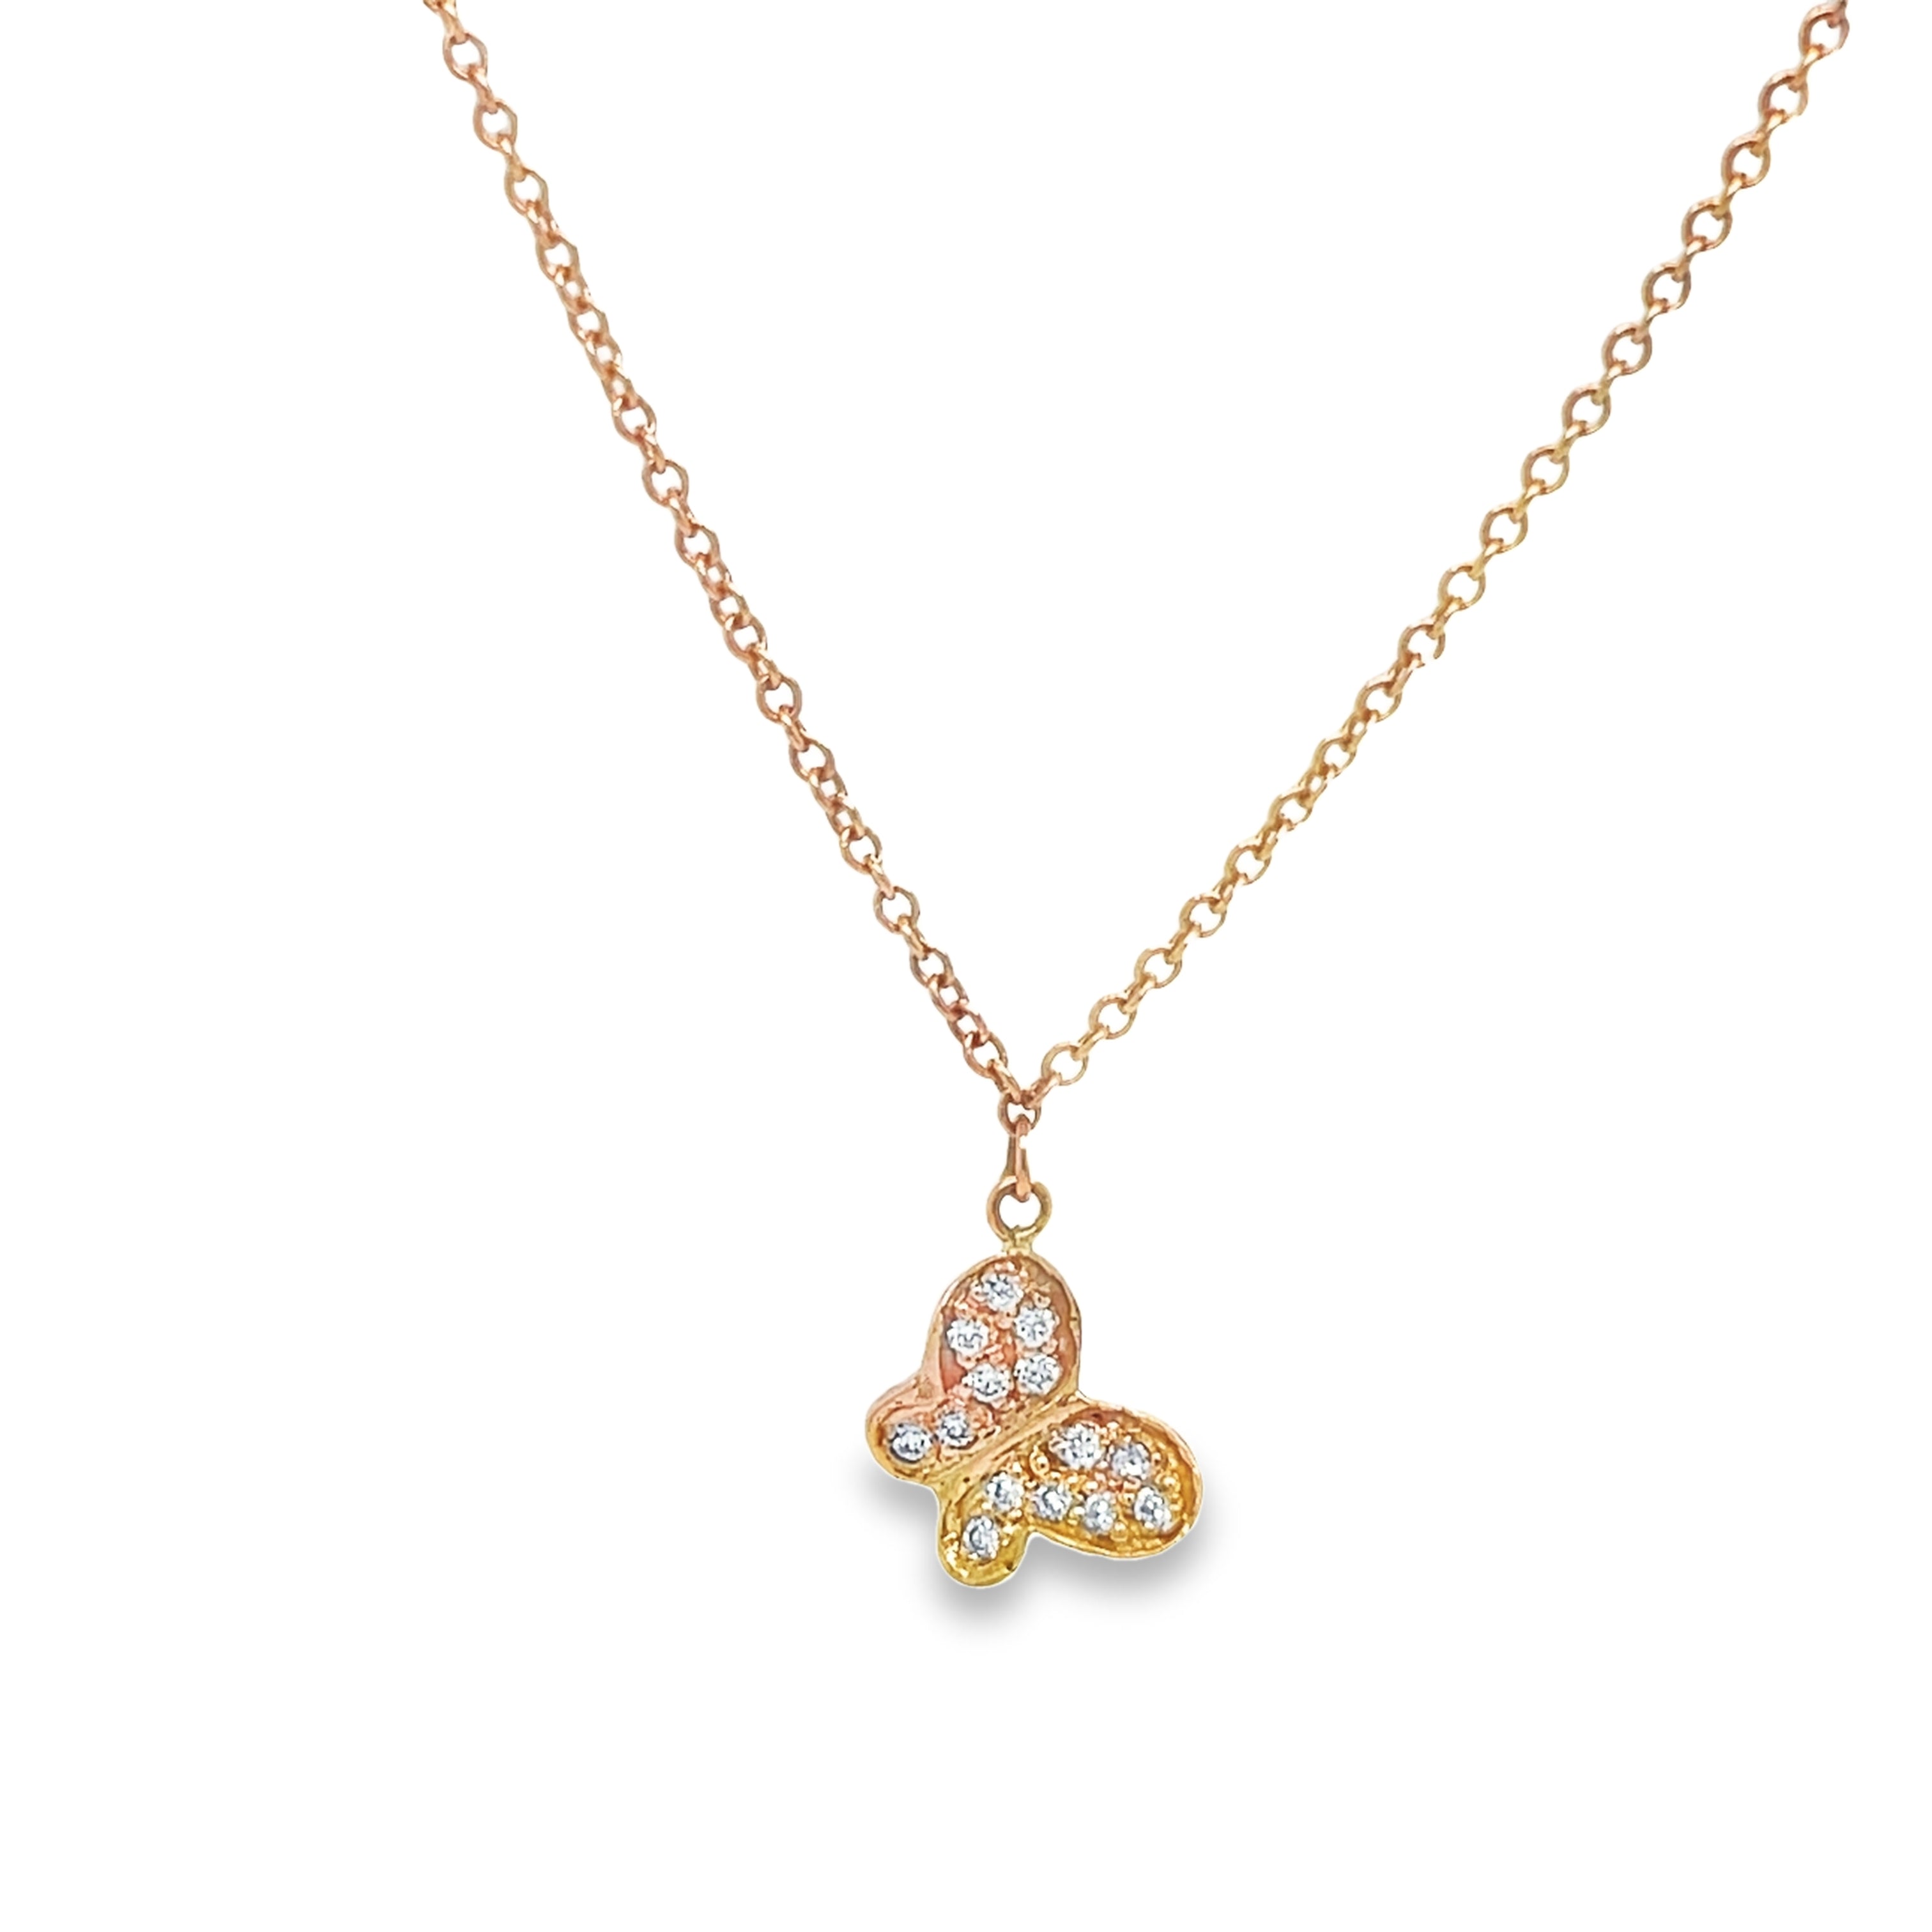 Expertly crafted with high-quality rose gold and 14k gold, this necklace features a delicate single small butterfly adorned with sparkling round diamonds. Perfectly sized at 16" long, this piece adds a touch of charm and elegance to any outfit. Elevate your style with this stunning butterfly necklace.